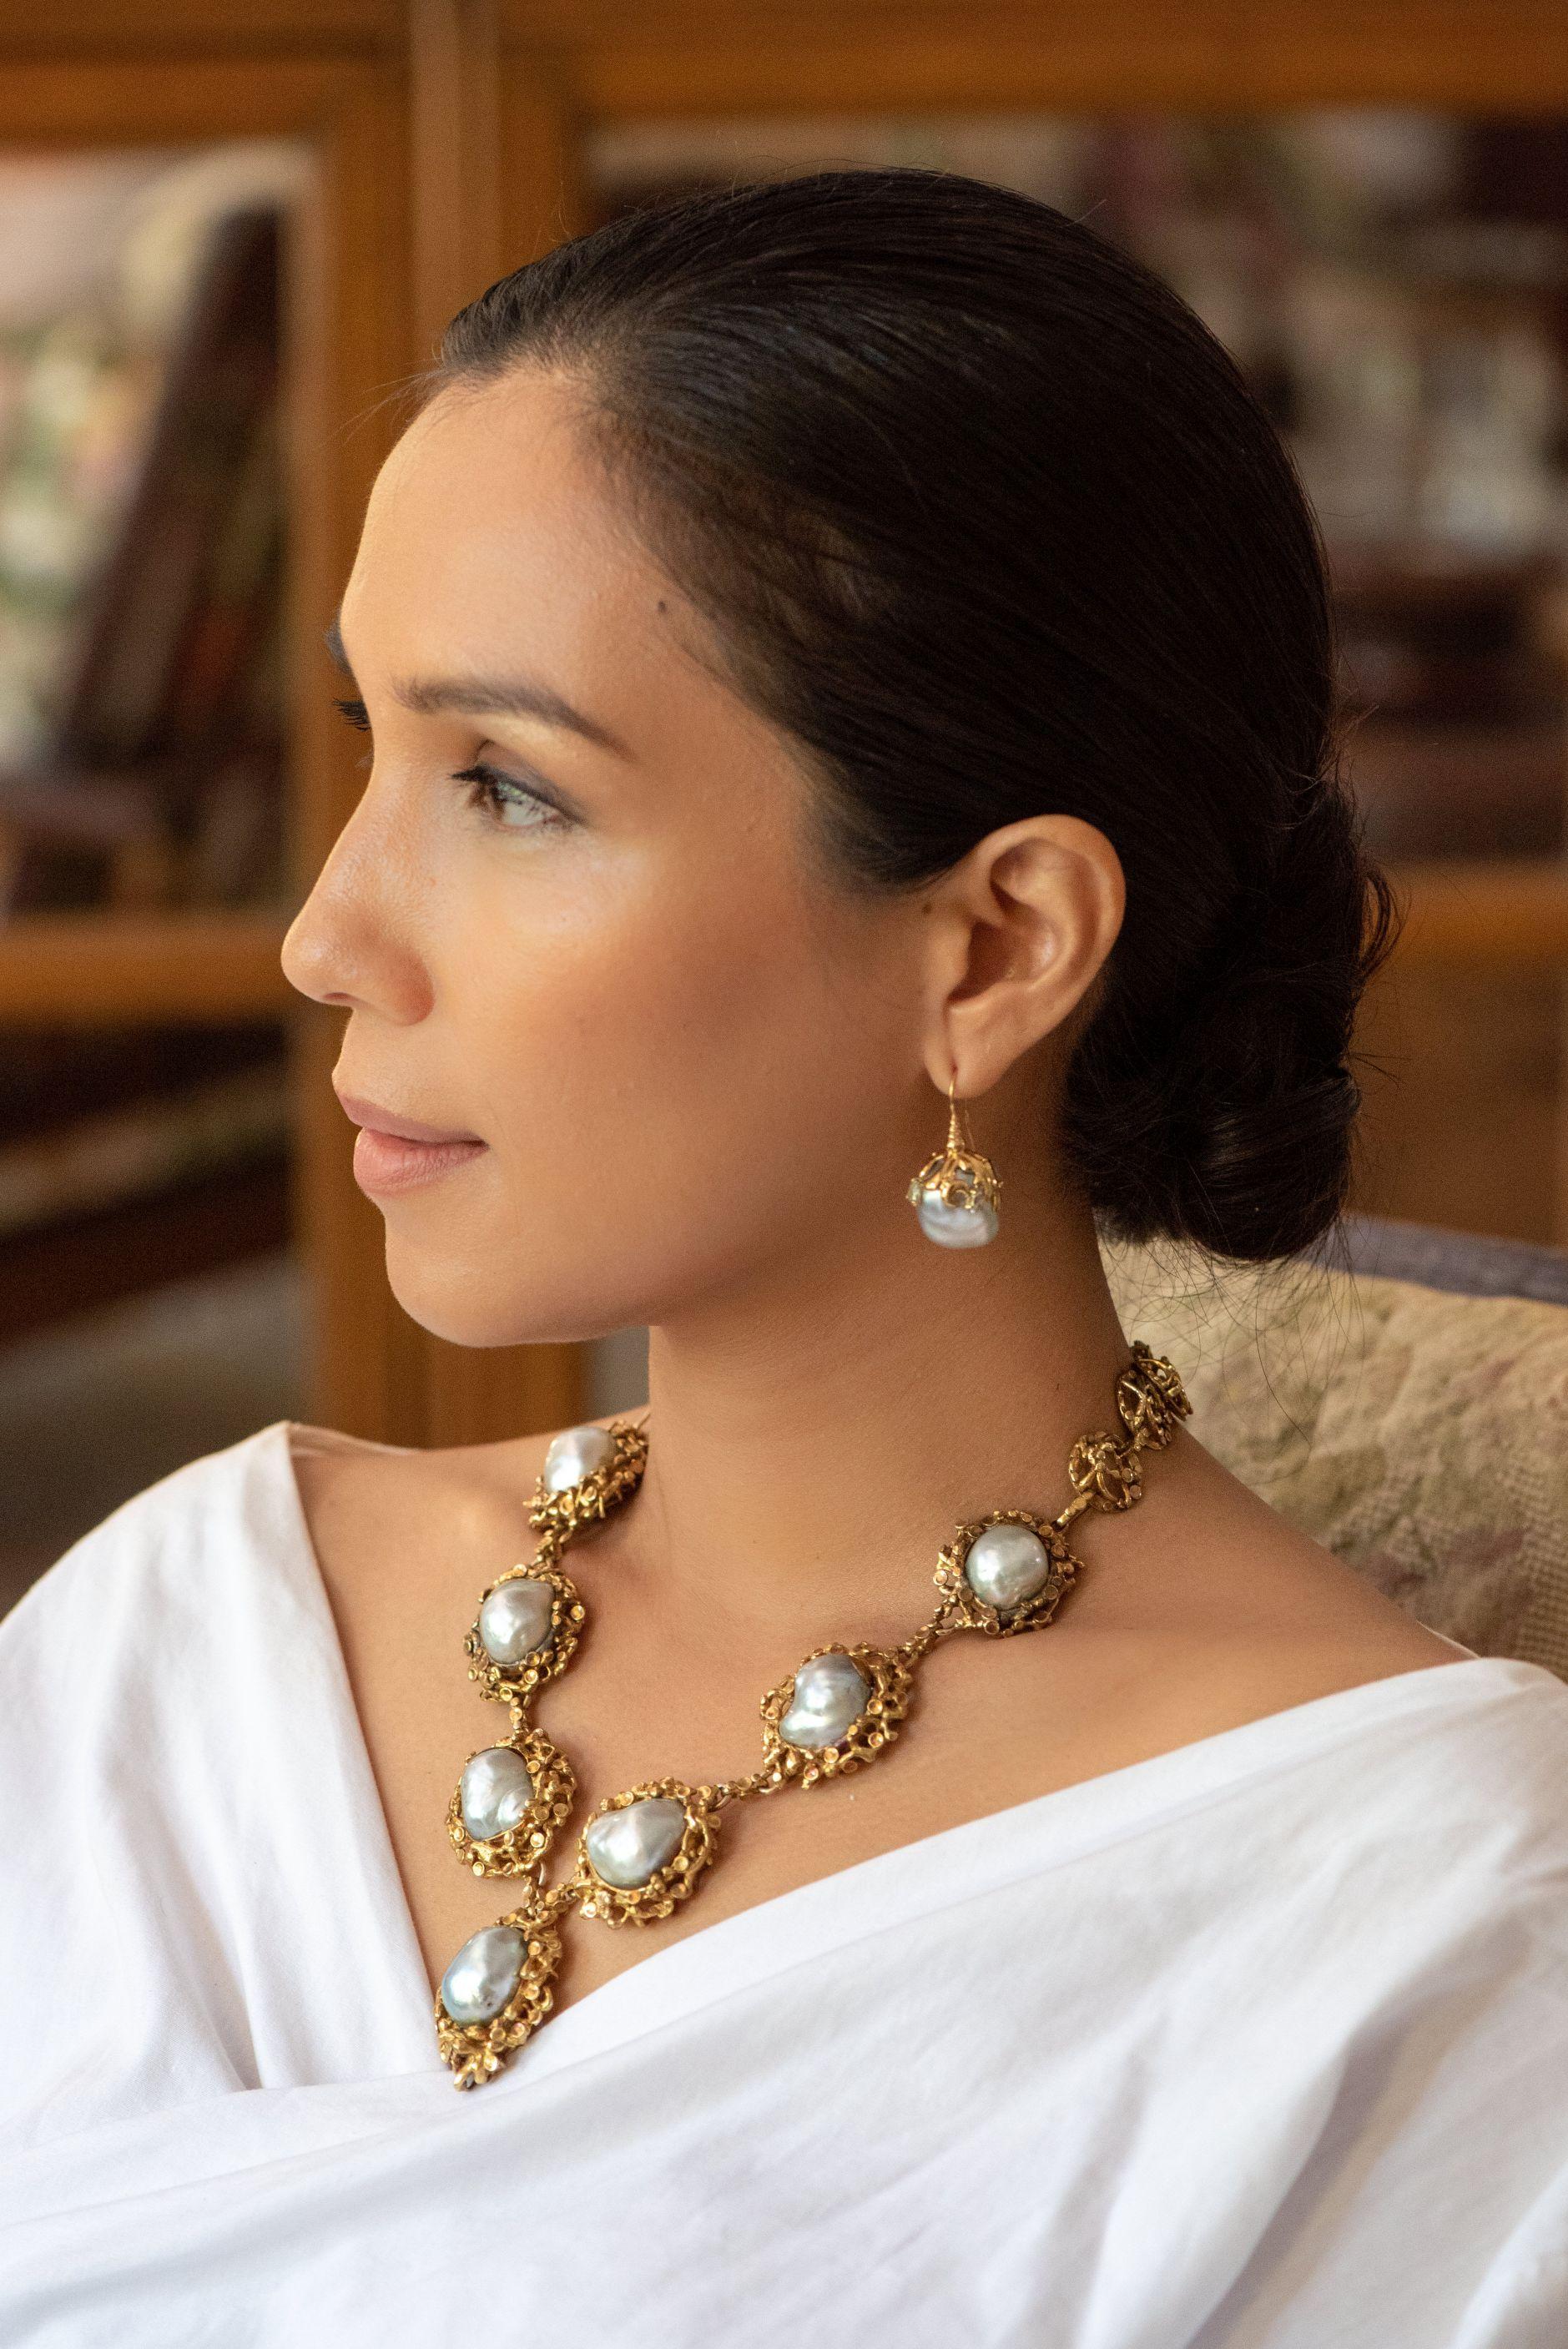 A magnificent sterling silver, 18 karat gold plated princess necklace featuring seven luminescent blue baroque south sea pearls nestling around a central medallion of 2.9 by 4 cm. 

The beautifully detailed work on the stone settings, as well as the